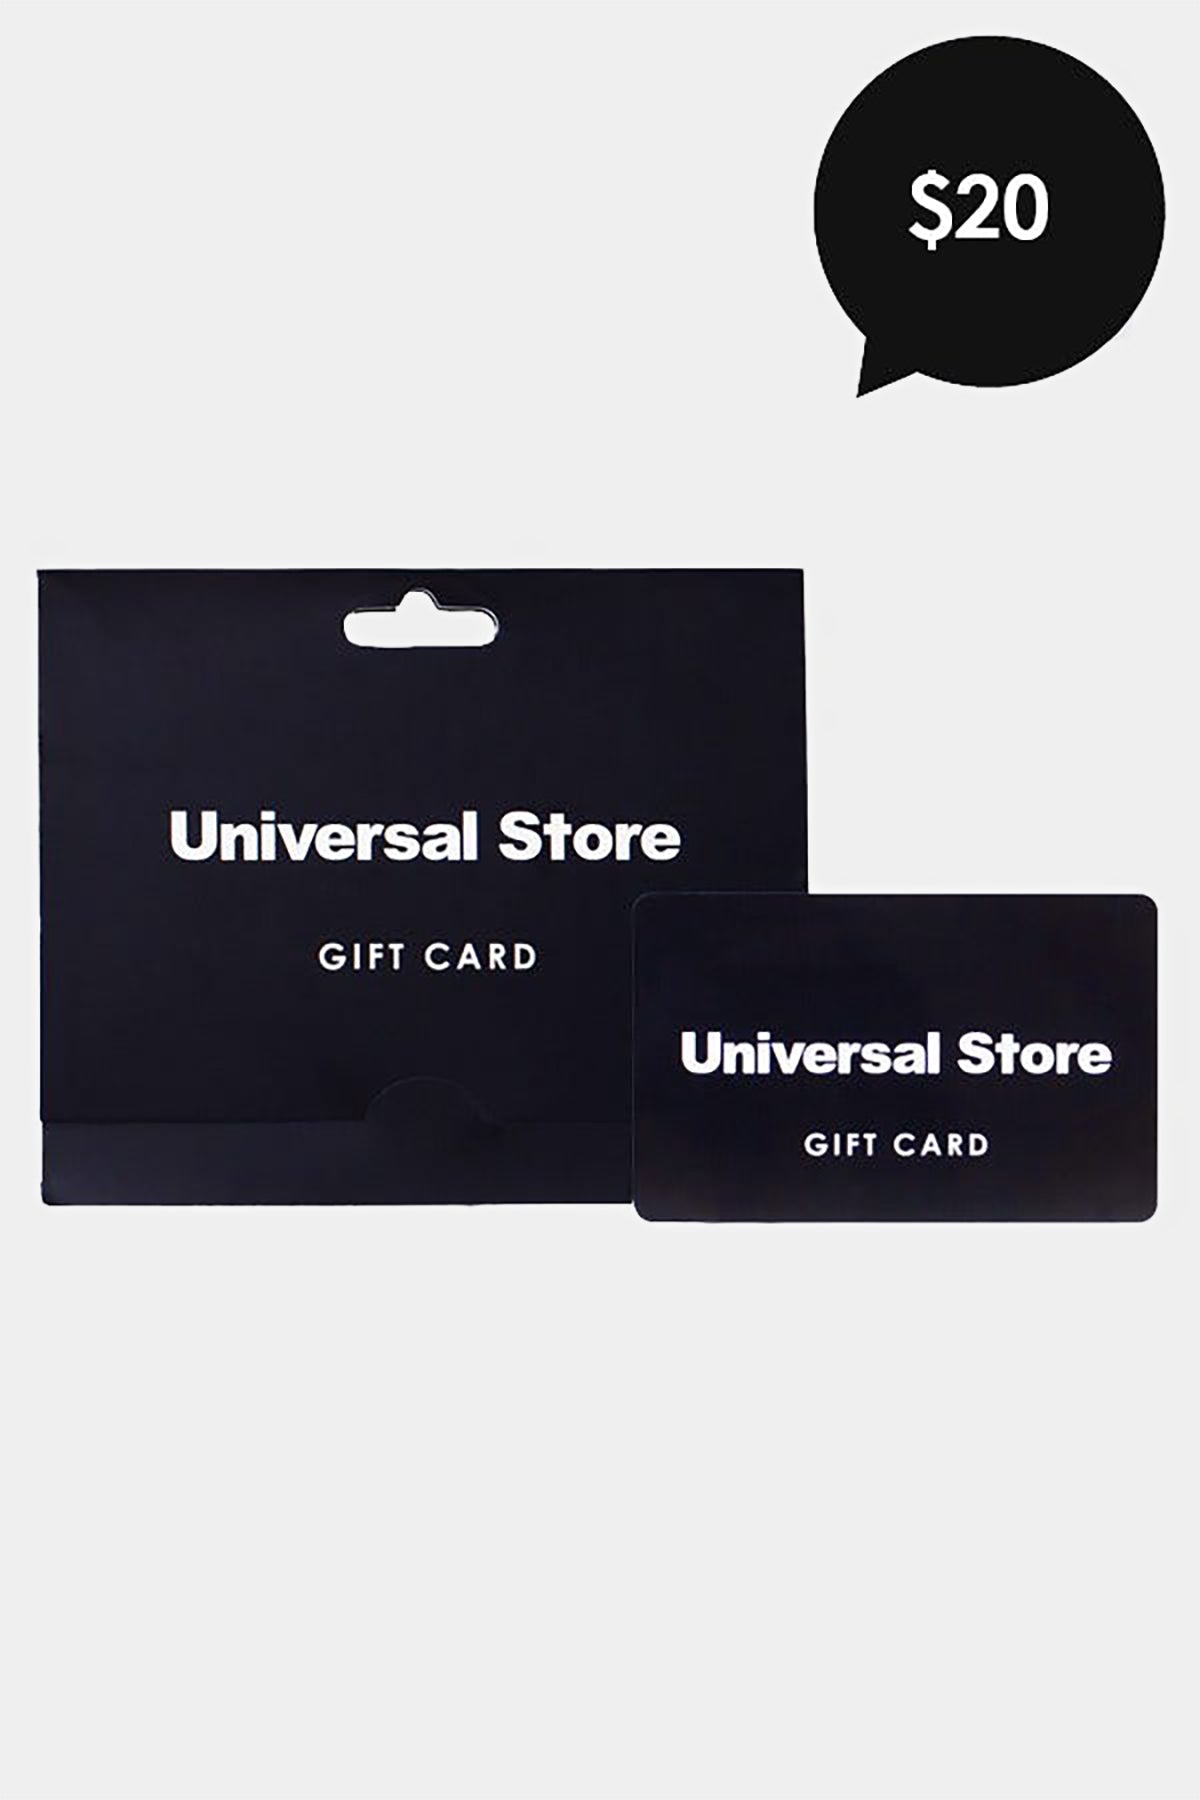 Universal Store $20 Gift Card